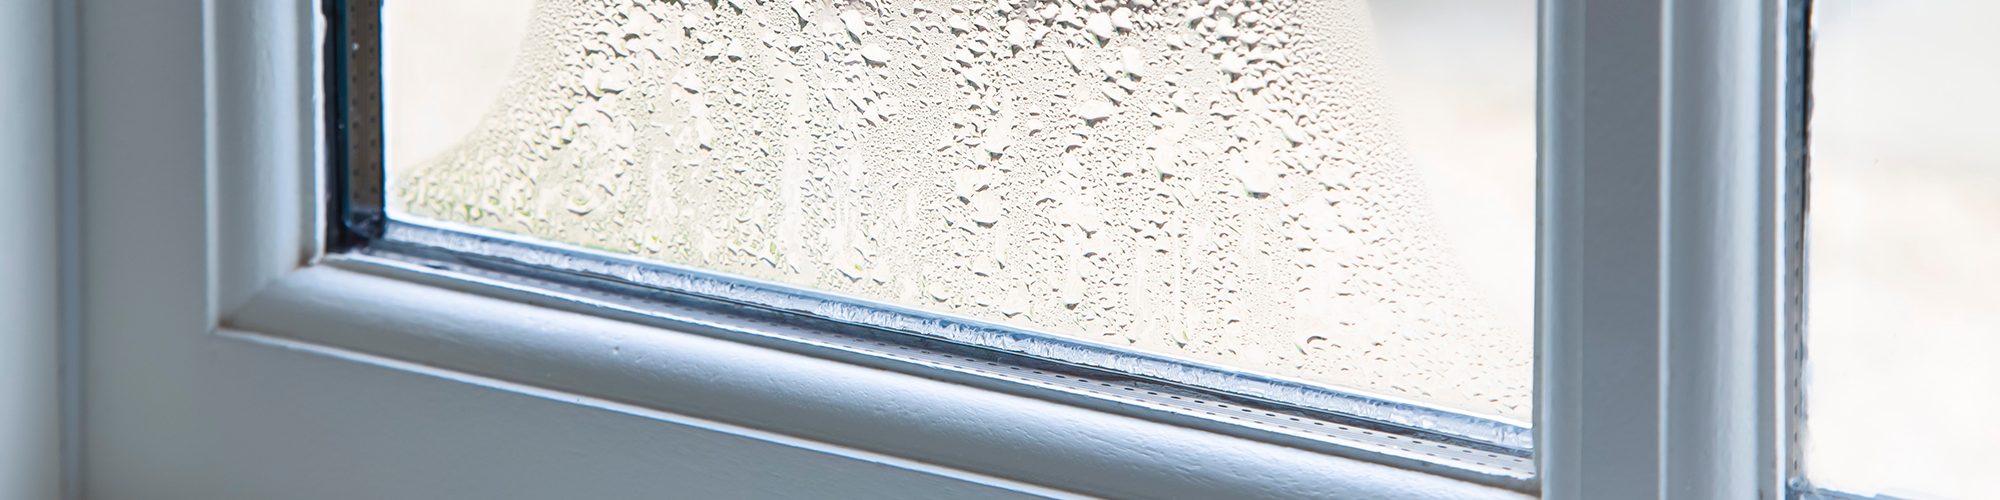 Can blown windows cause damp? SAM Conveyancing explains how to spot the signs